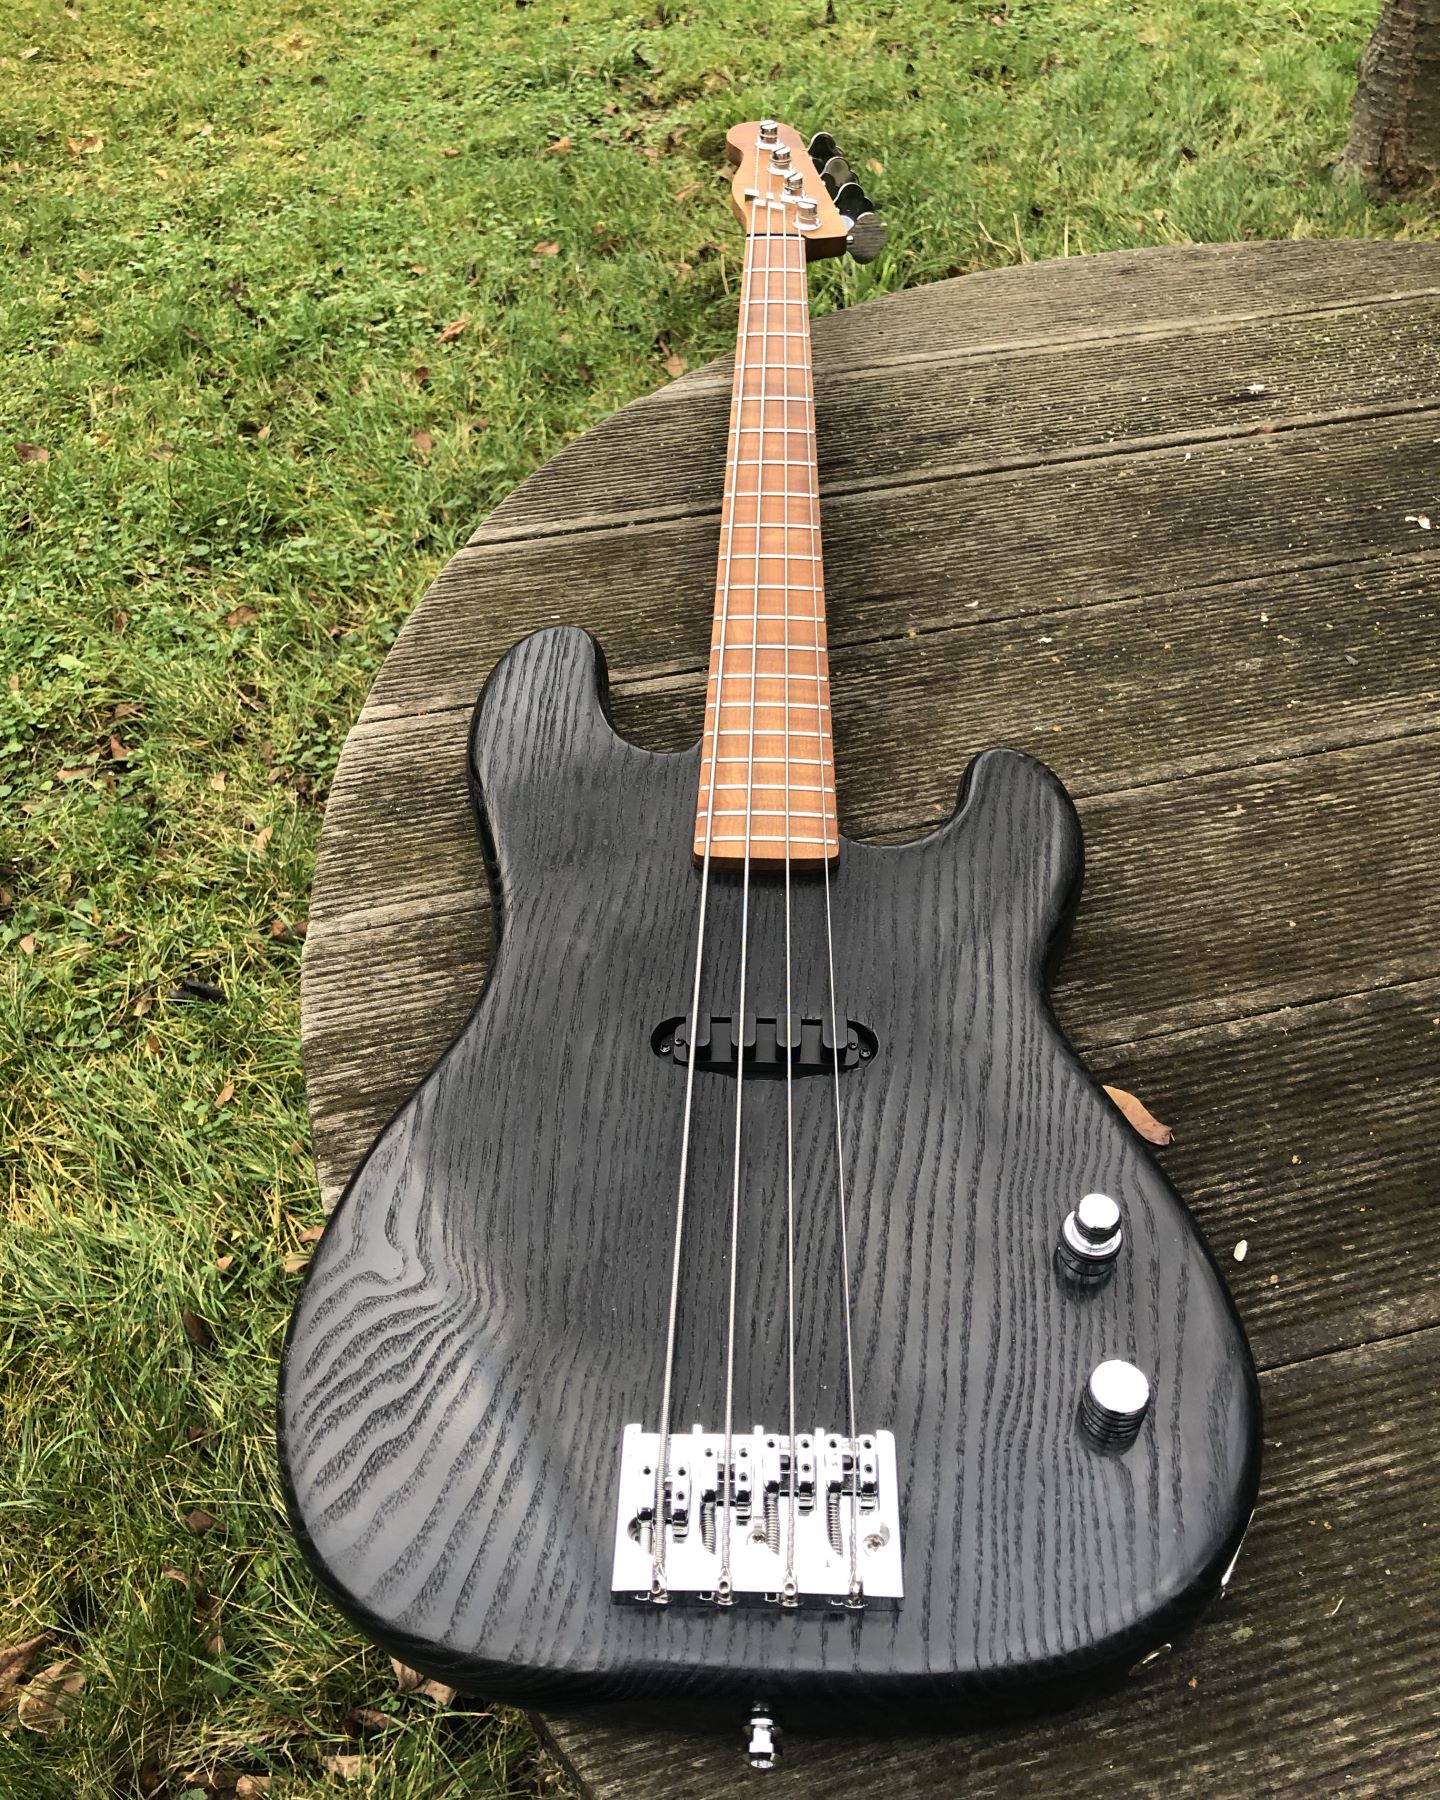 Photo showing the entire finished bass guitar. The bass has a reversed '51 precision bass headstock and no fretboard inlays.